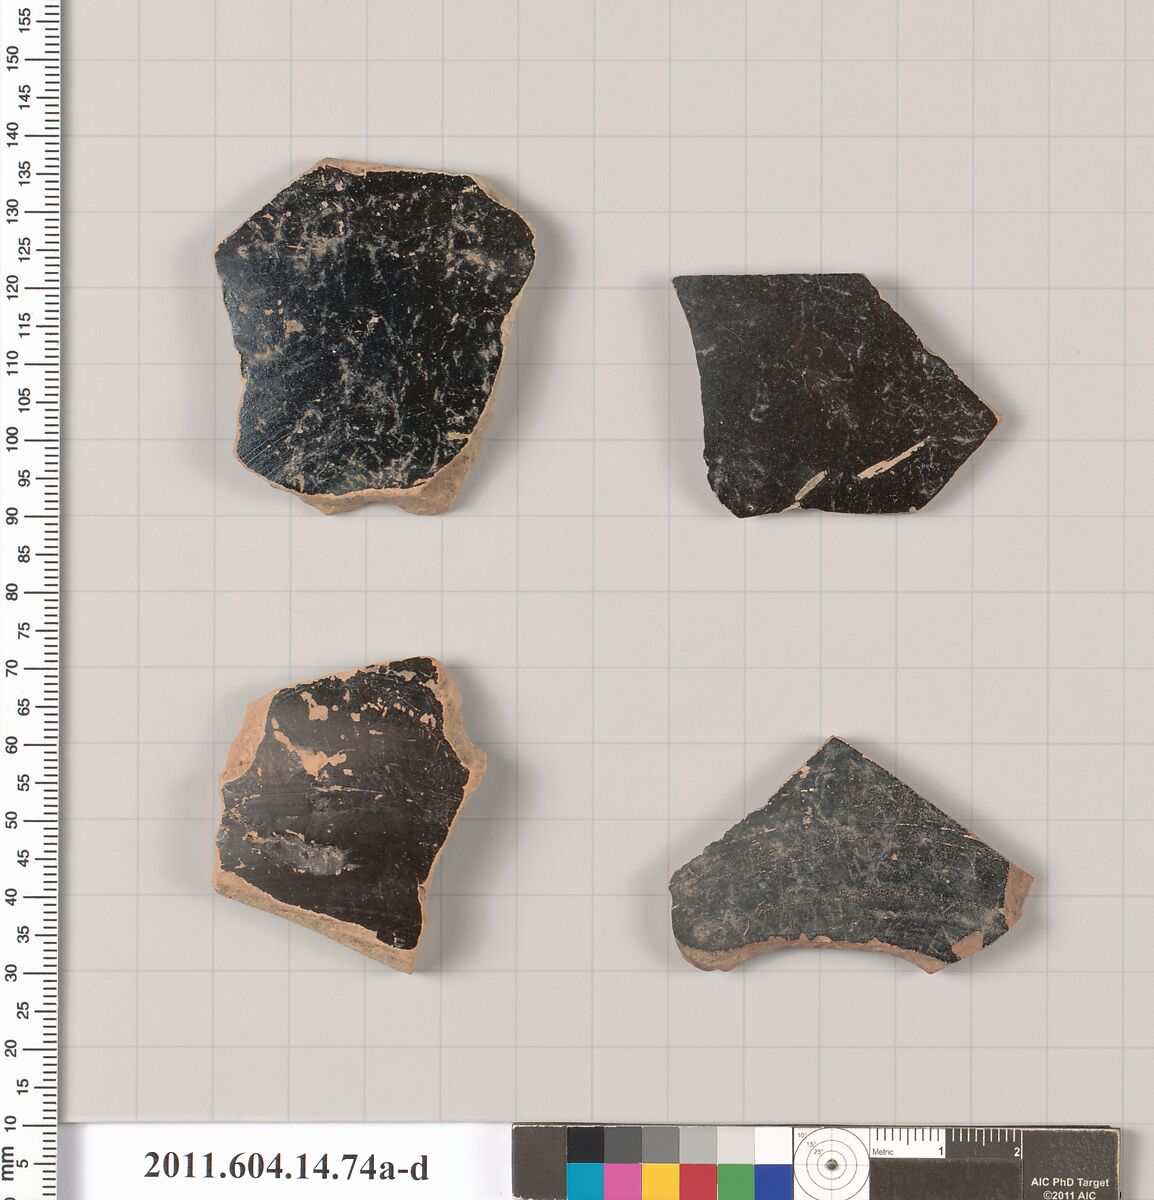 Terracotta fragments of kylikes (drinking cups), Terracotta, Unknown fabric 